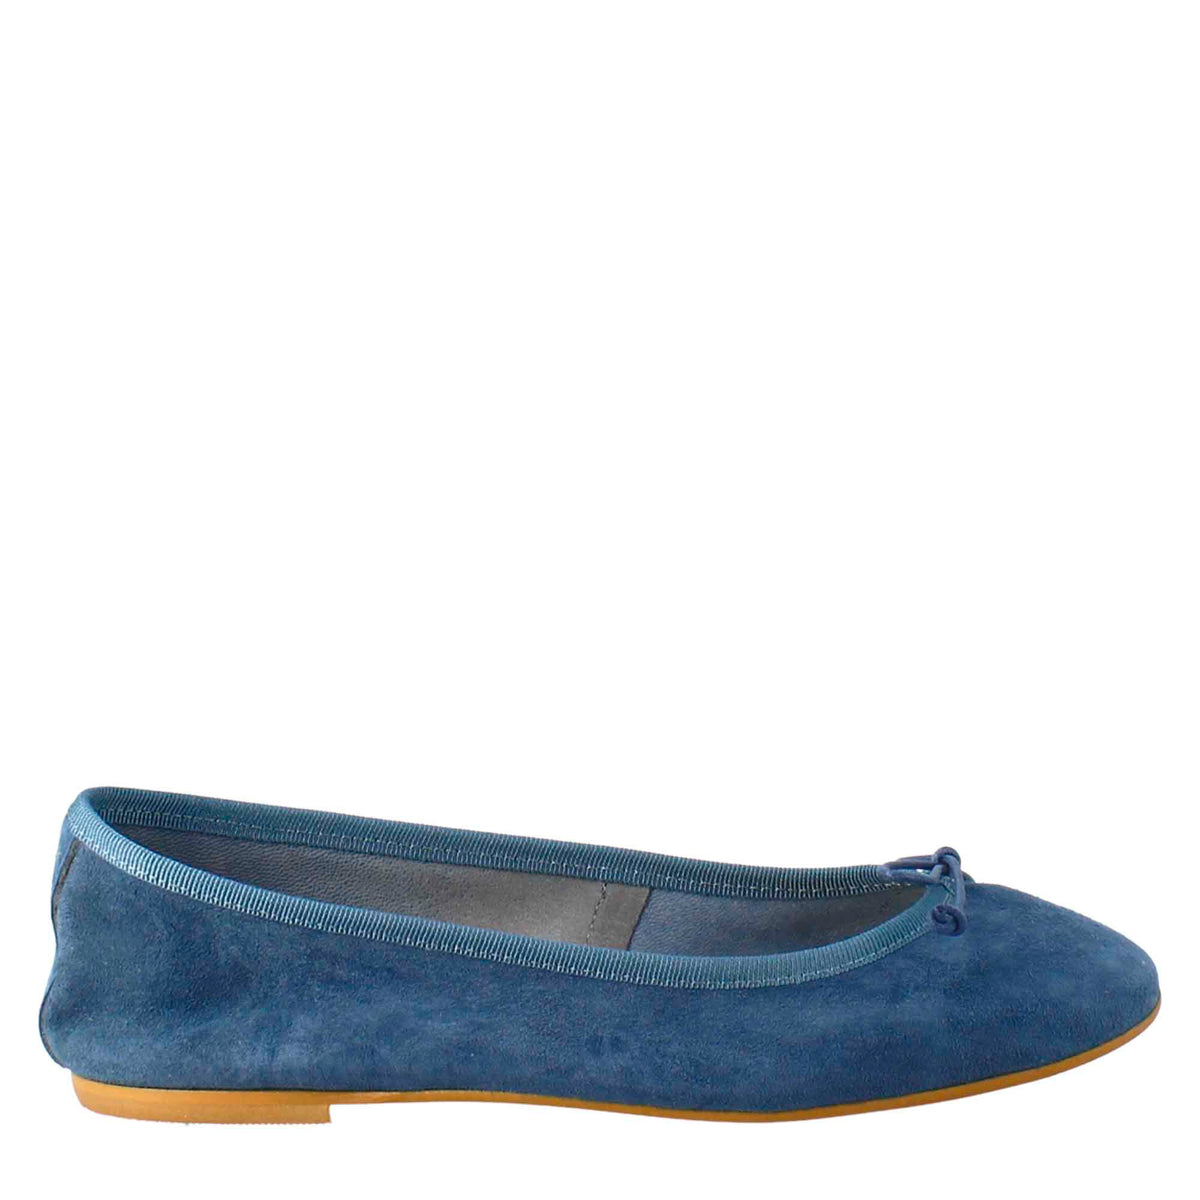 Light blue women's ballet flats in smooth leather, unlined